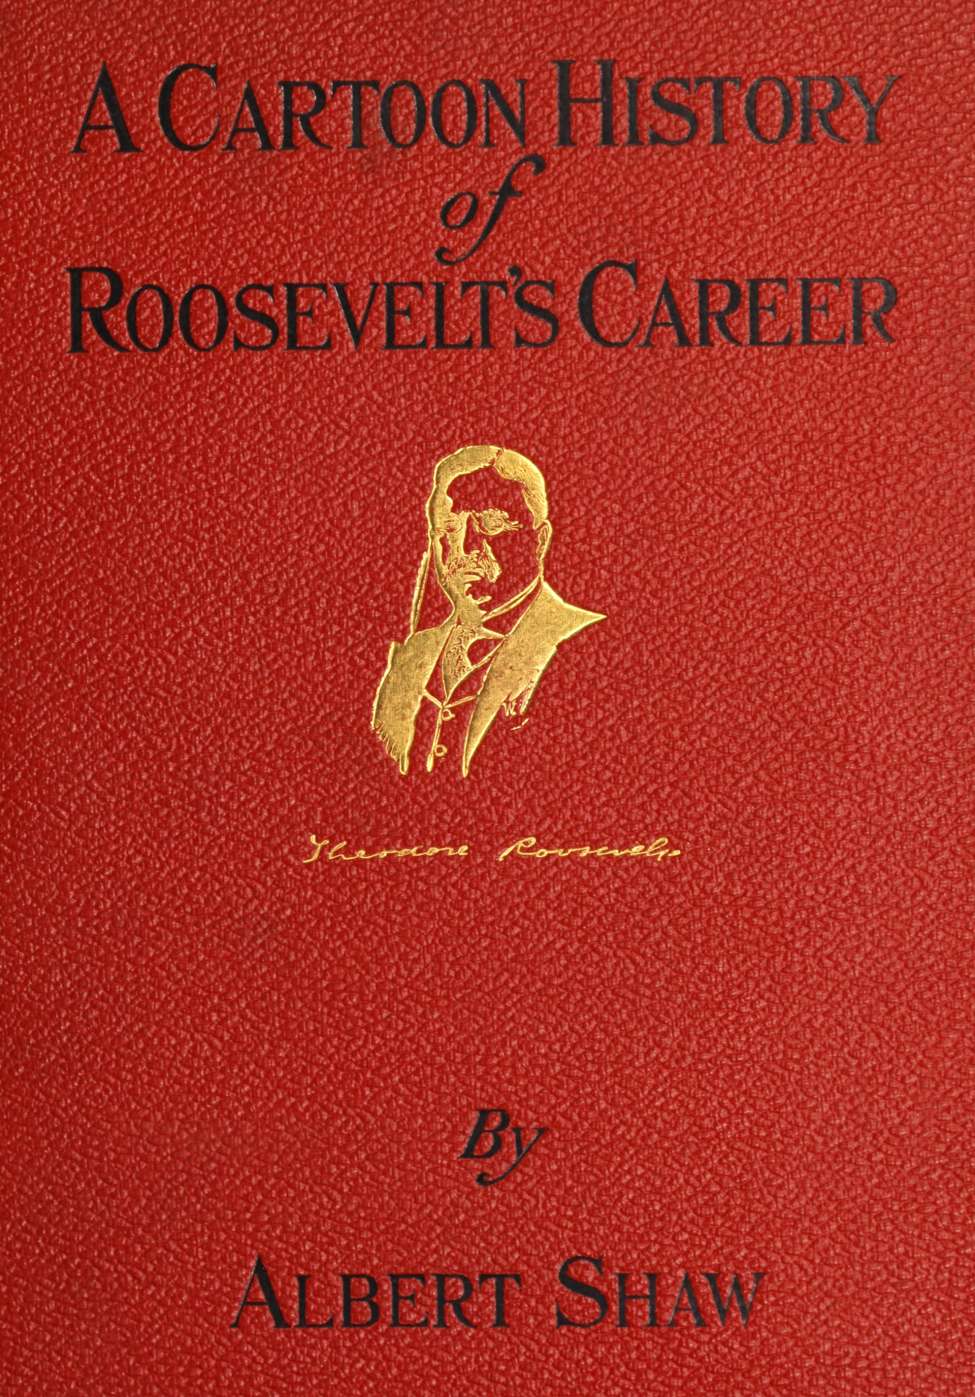 Comic Book Cover For Cartoon History of Roosevelt's Career